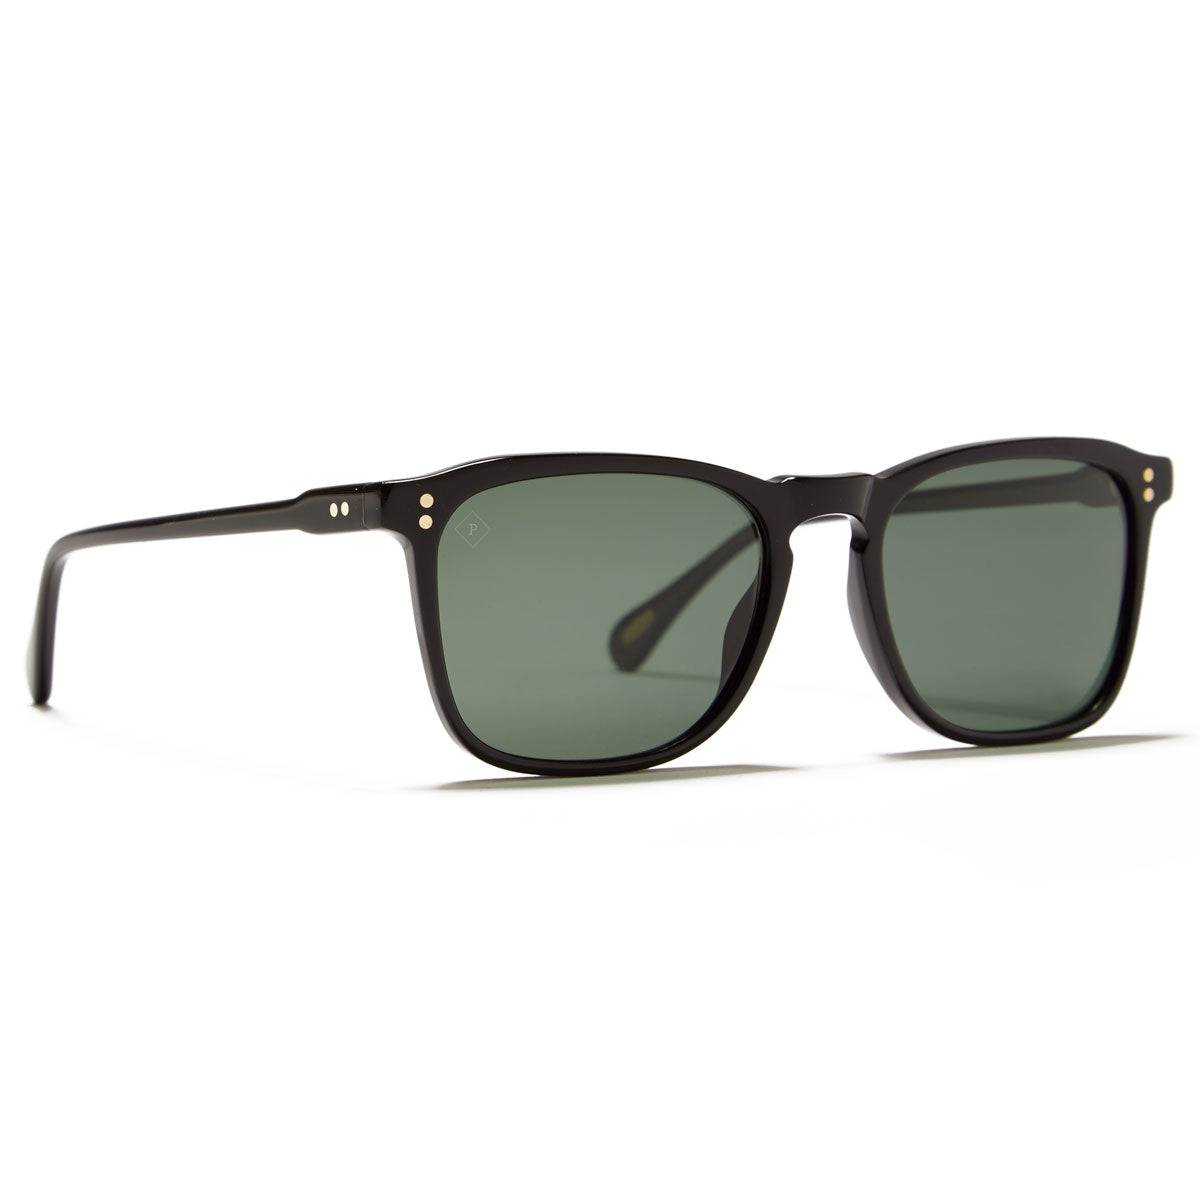 Raen Wiley 54 Sunglasses - Recycled Black/Green Polarized